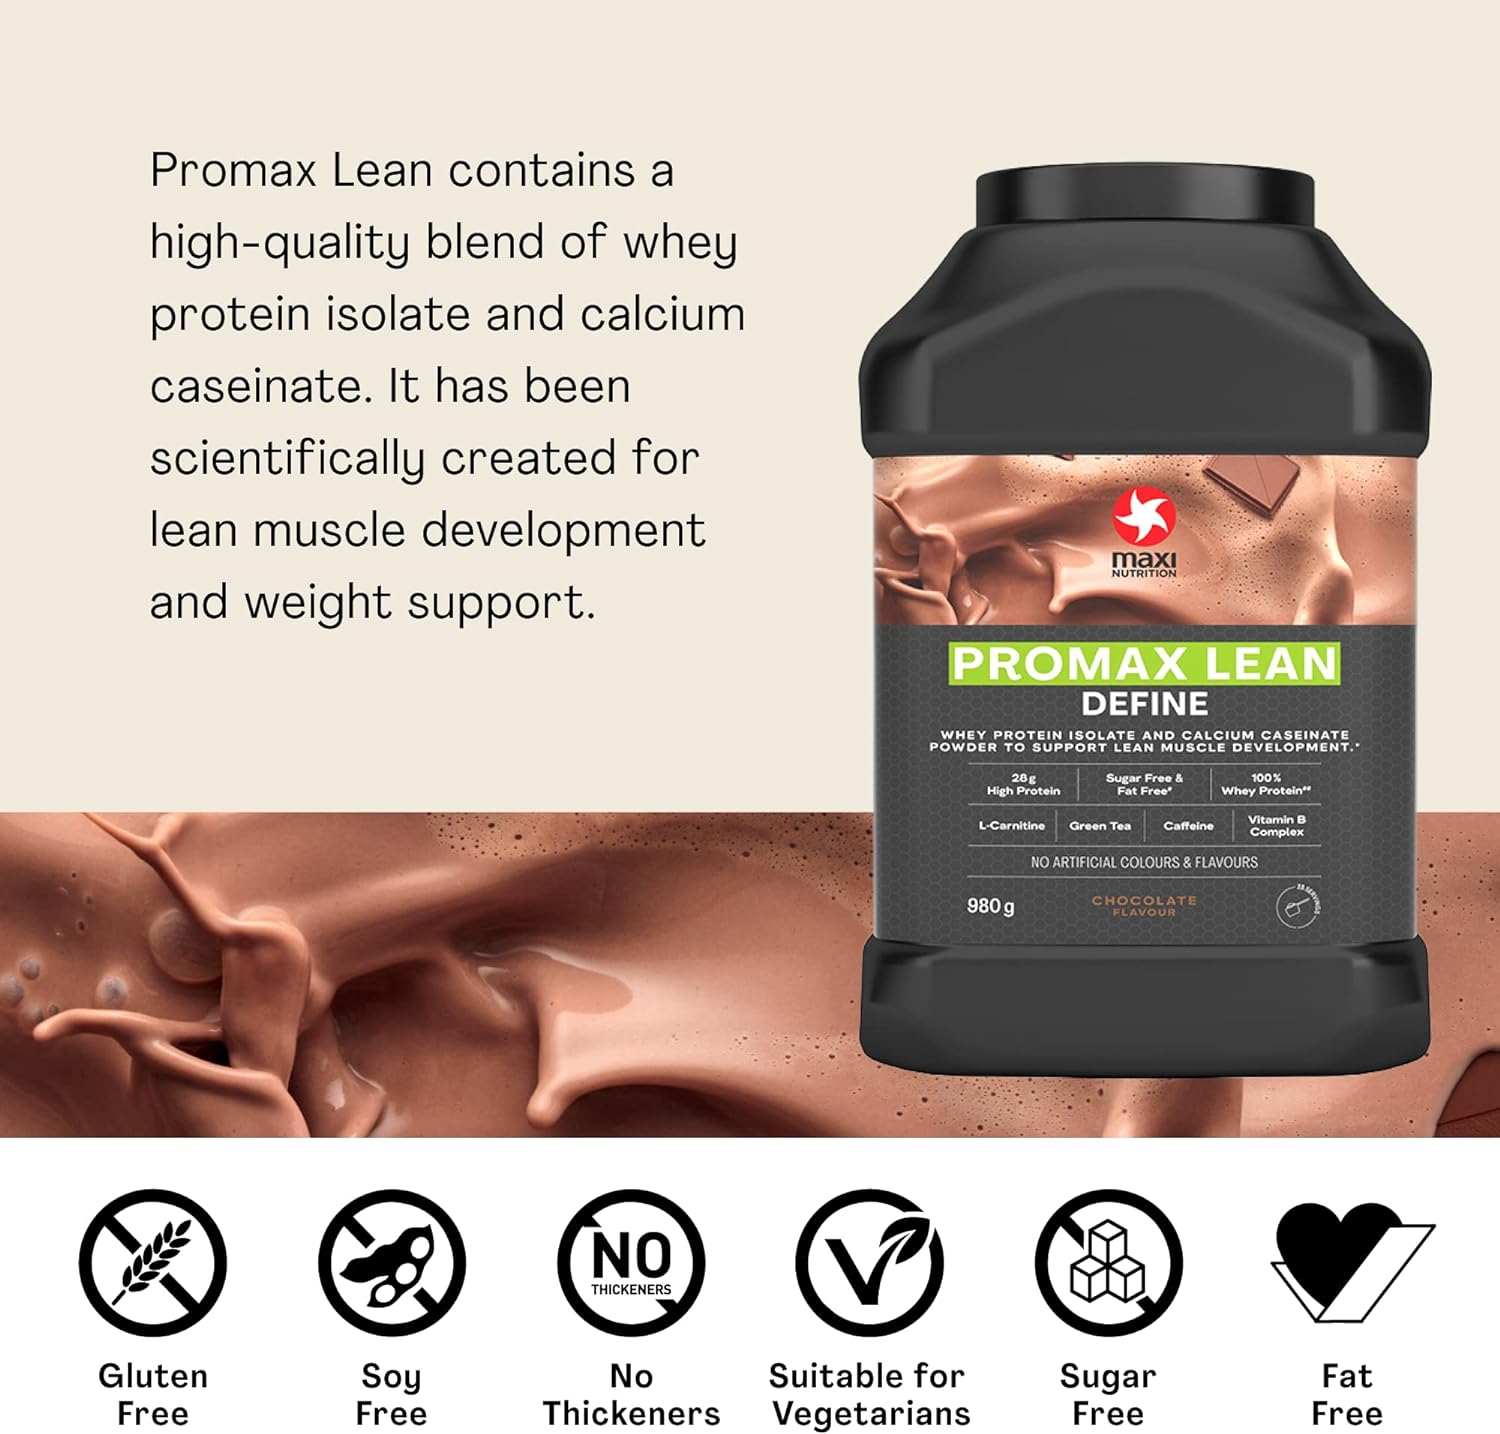 MaxiNutrition - Promax Lean, Chocolate - Whey Protein Powder for Lean Muscle Development – Sugar free, Fat Free, 28g Protein, 128 kcal per Serving, 980g